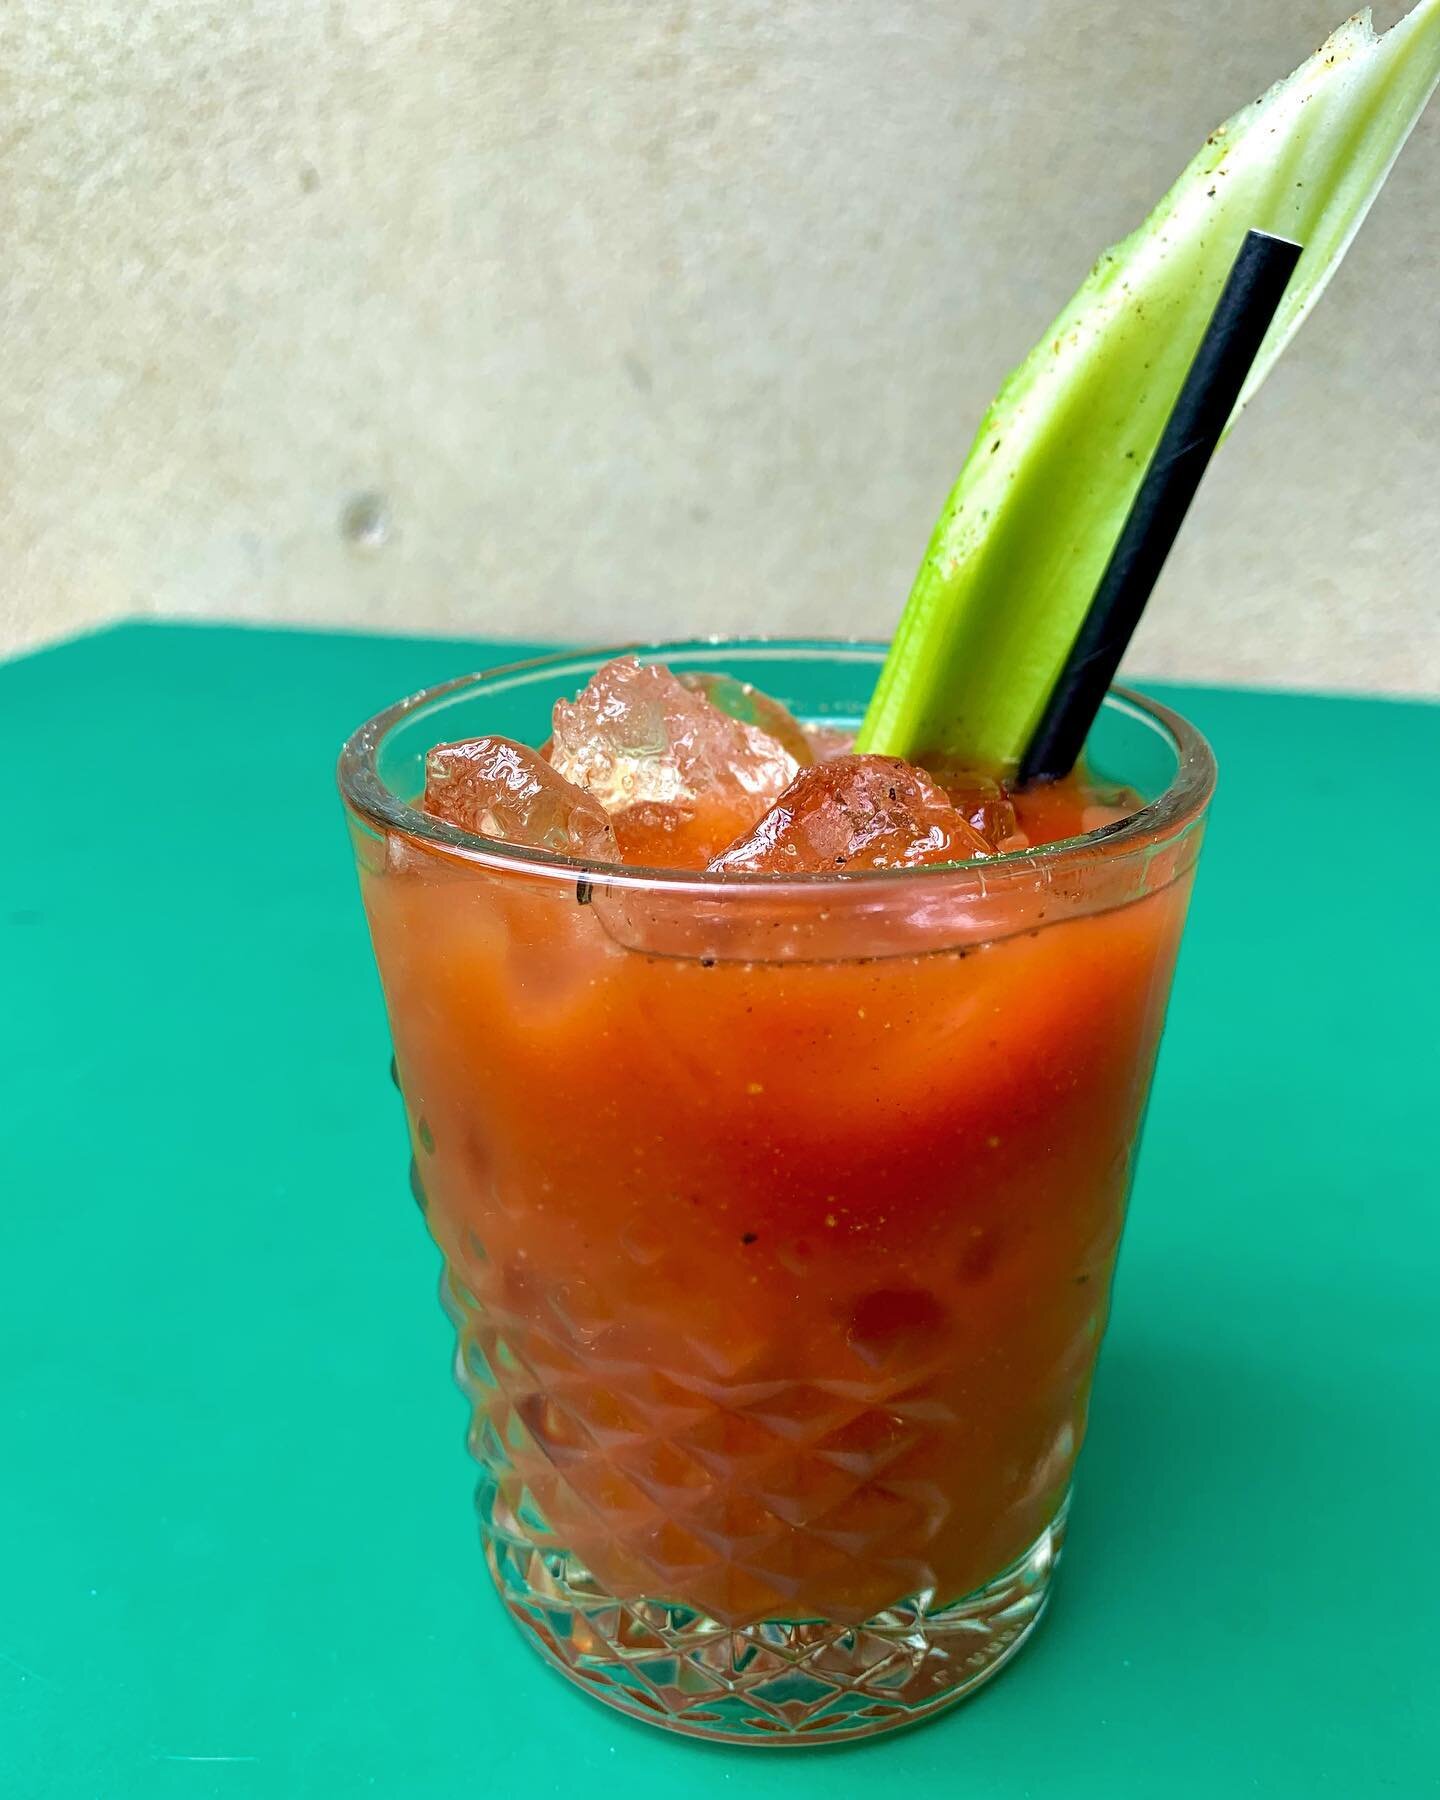 A Bloody Mary is just the right thing sometimes for those mornings...you know...! We&rsquo;ve got you covered!  In the garden with some fresh air, sunny rays and good vibes! 

Perfect match with one of our amazing breakfasts!  And to finish things of